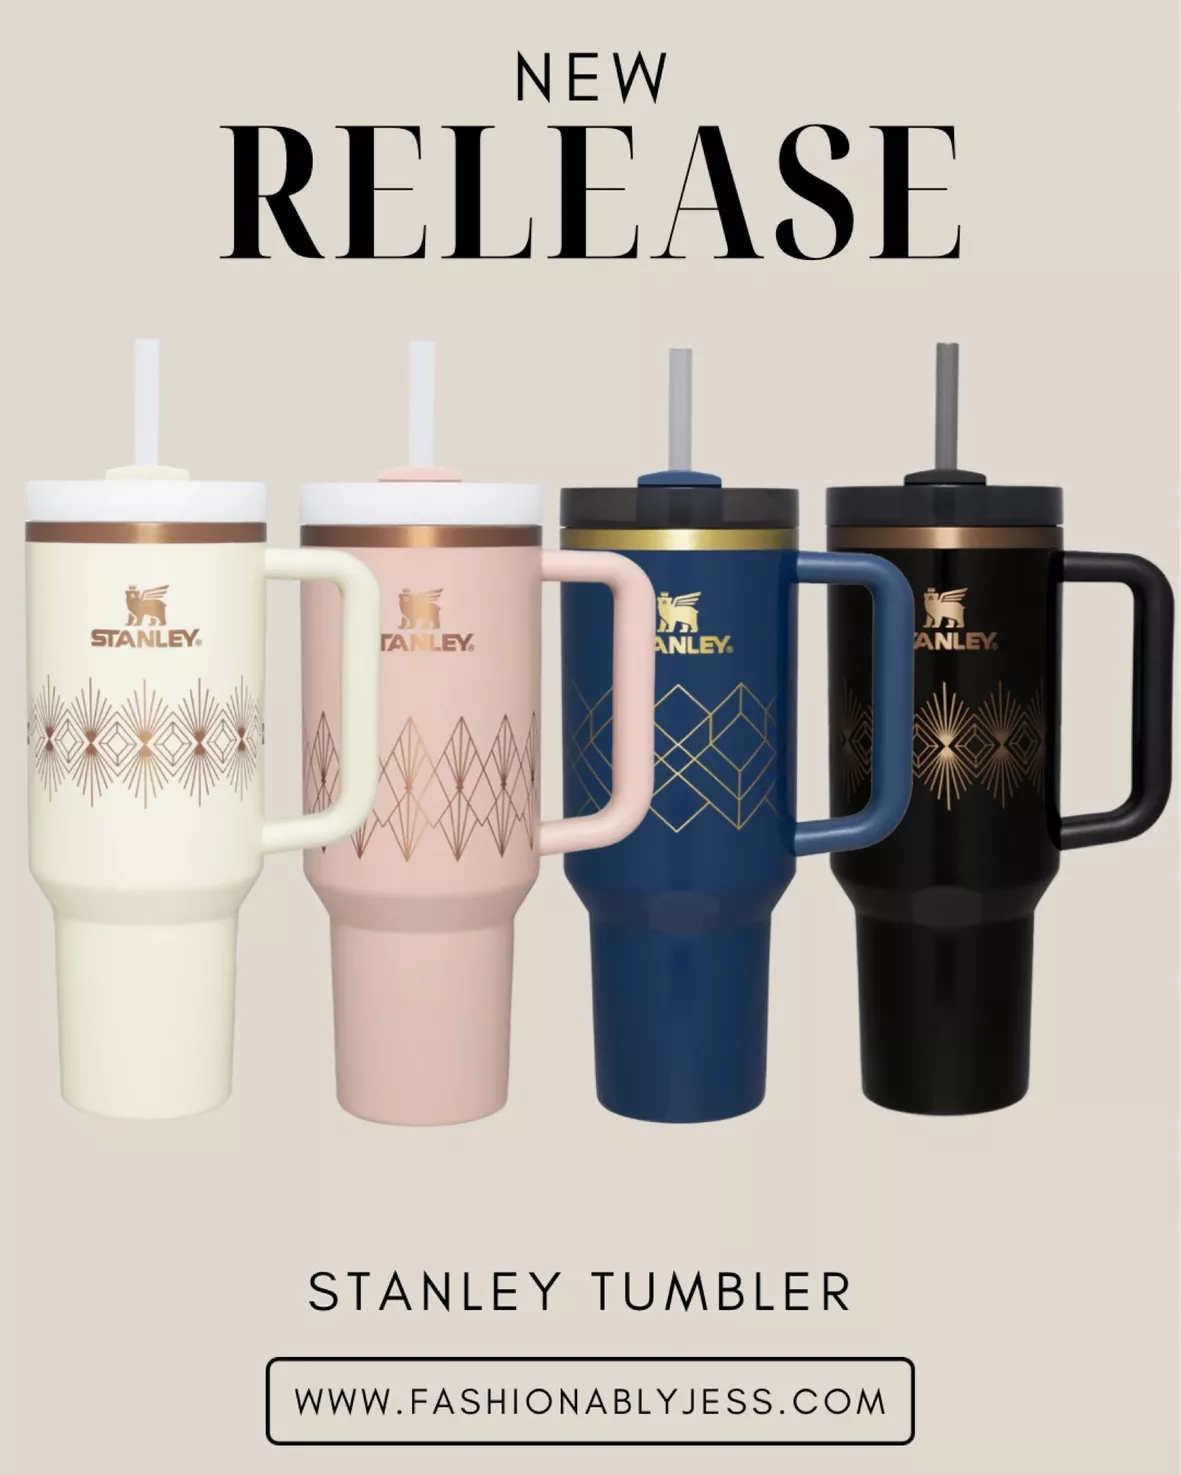 Stanley just released a Quencher deco collection